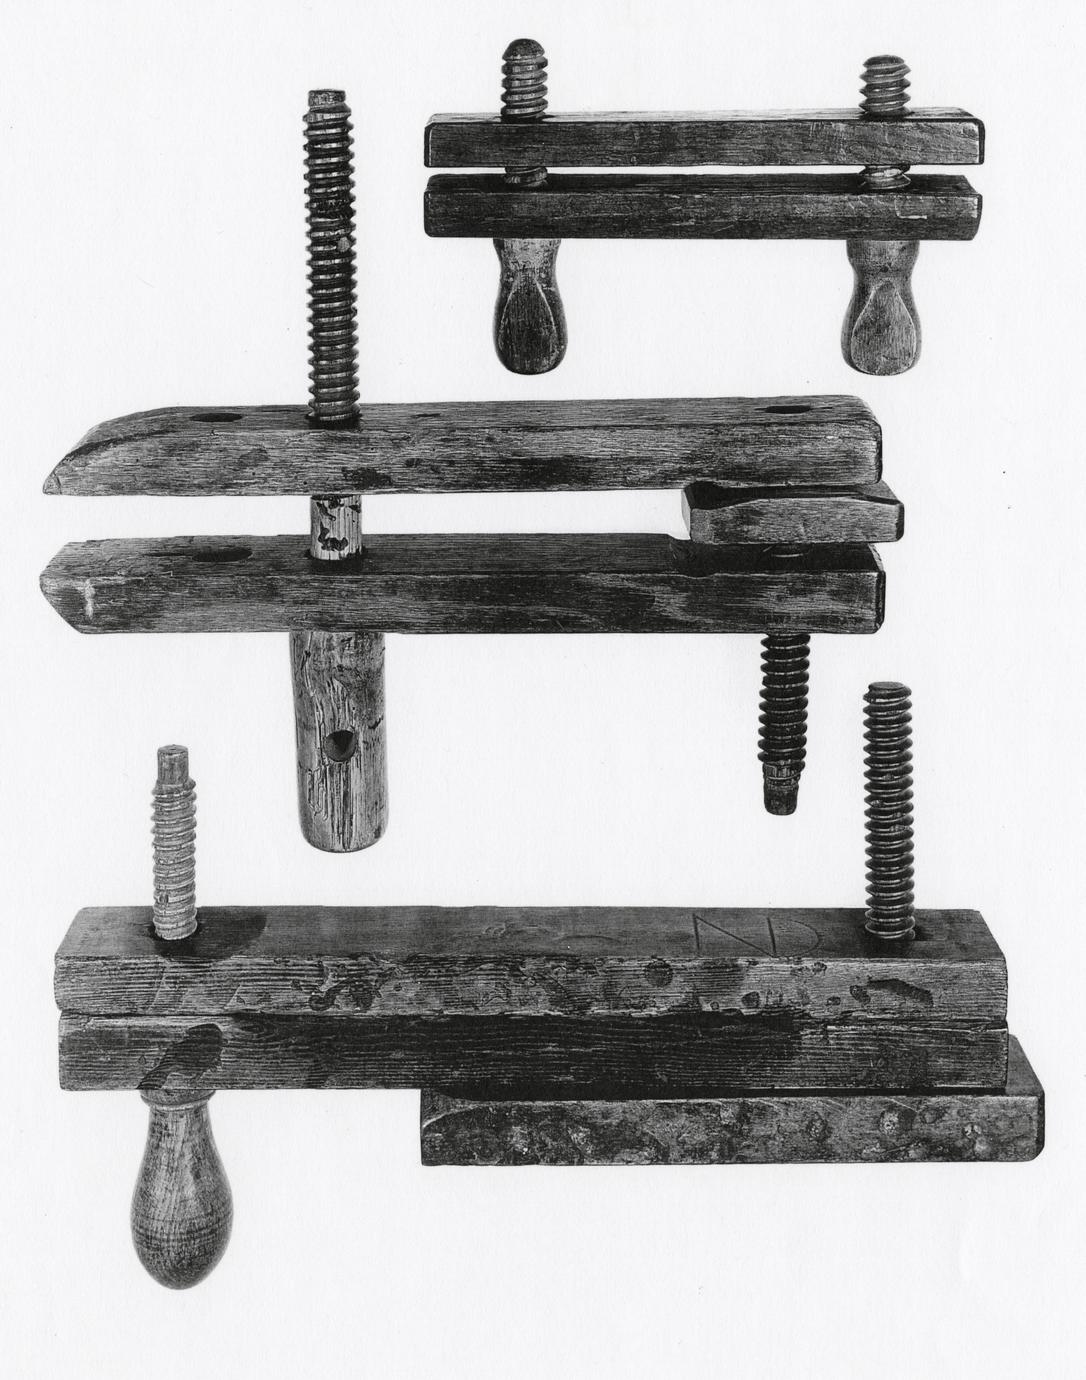 Three examples of clamps of different sizes.